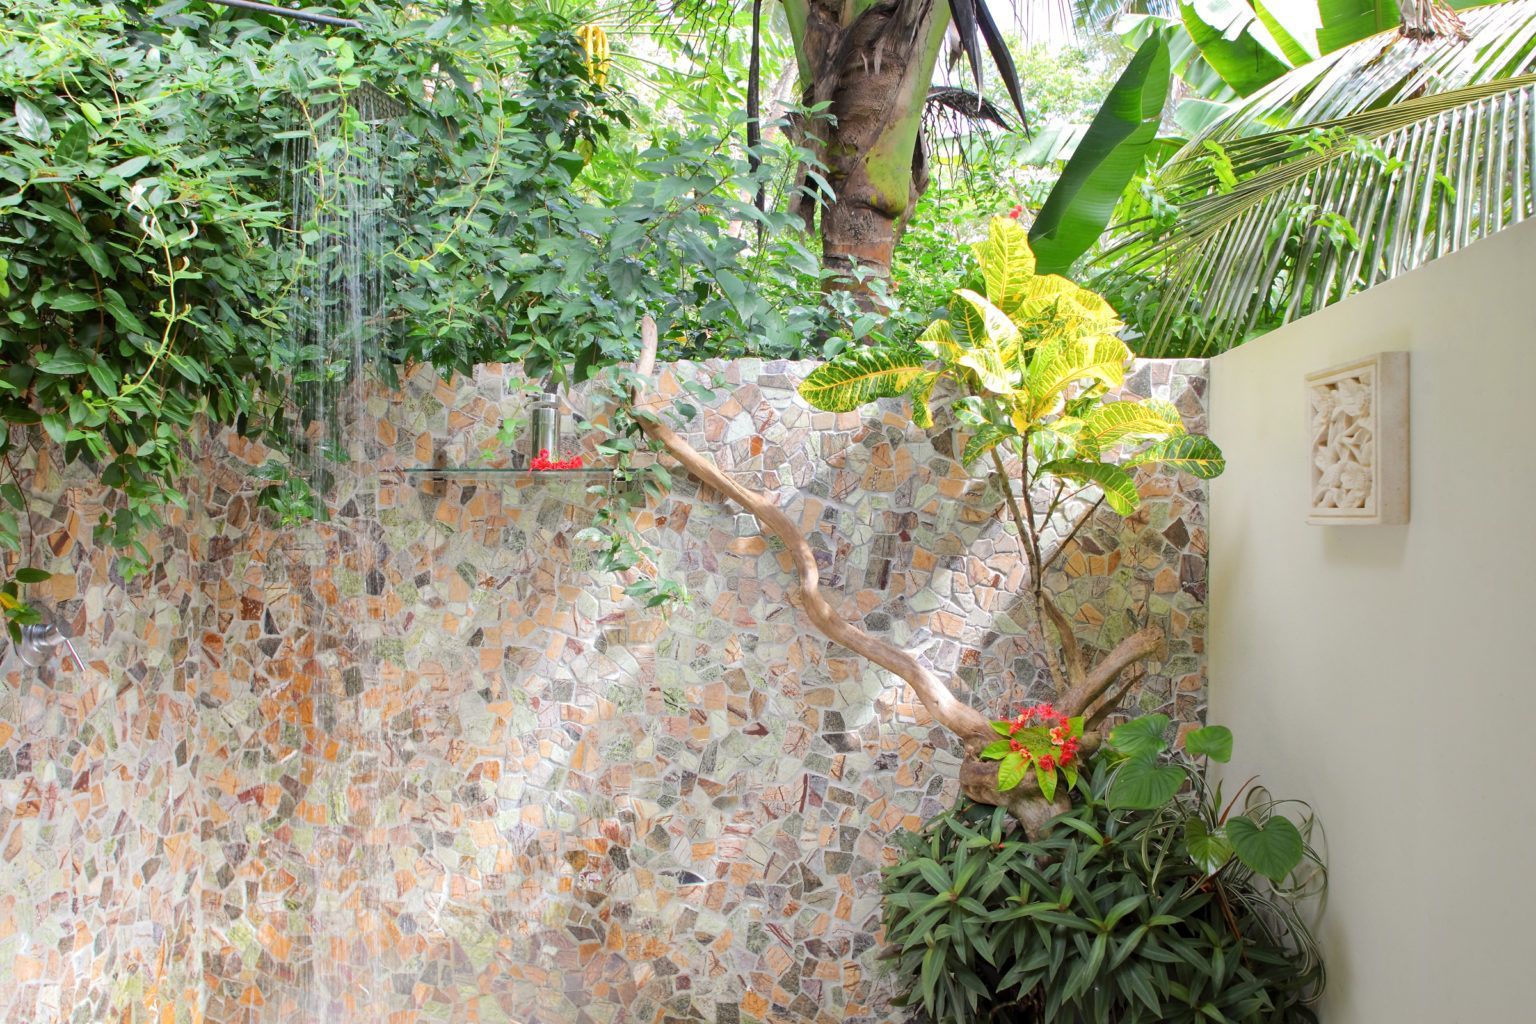 The outdoor shower area complete with a decorative stone wall and plants at Sau Bay Resort in Fiji 